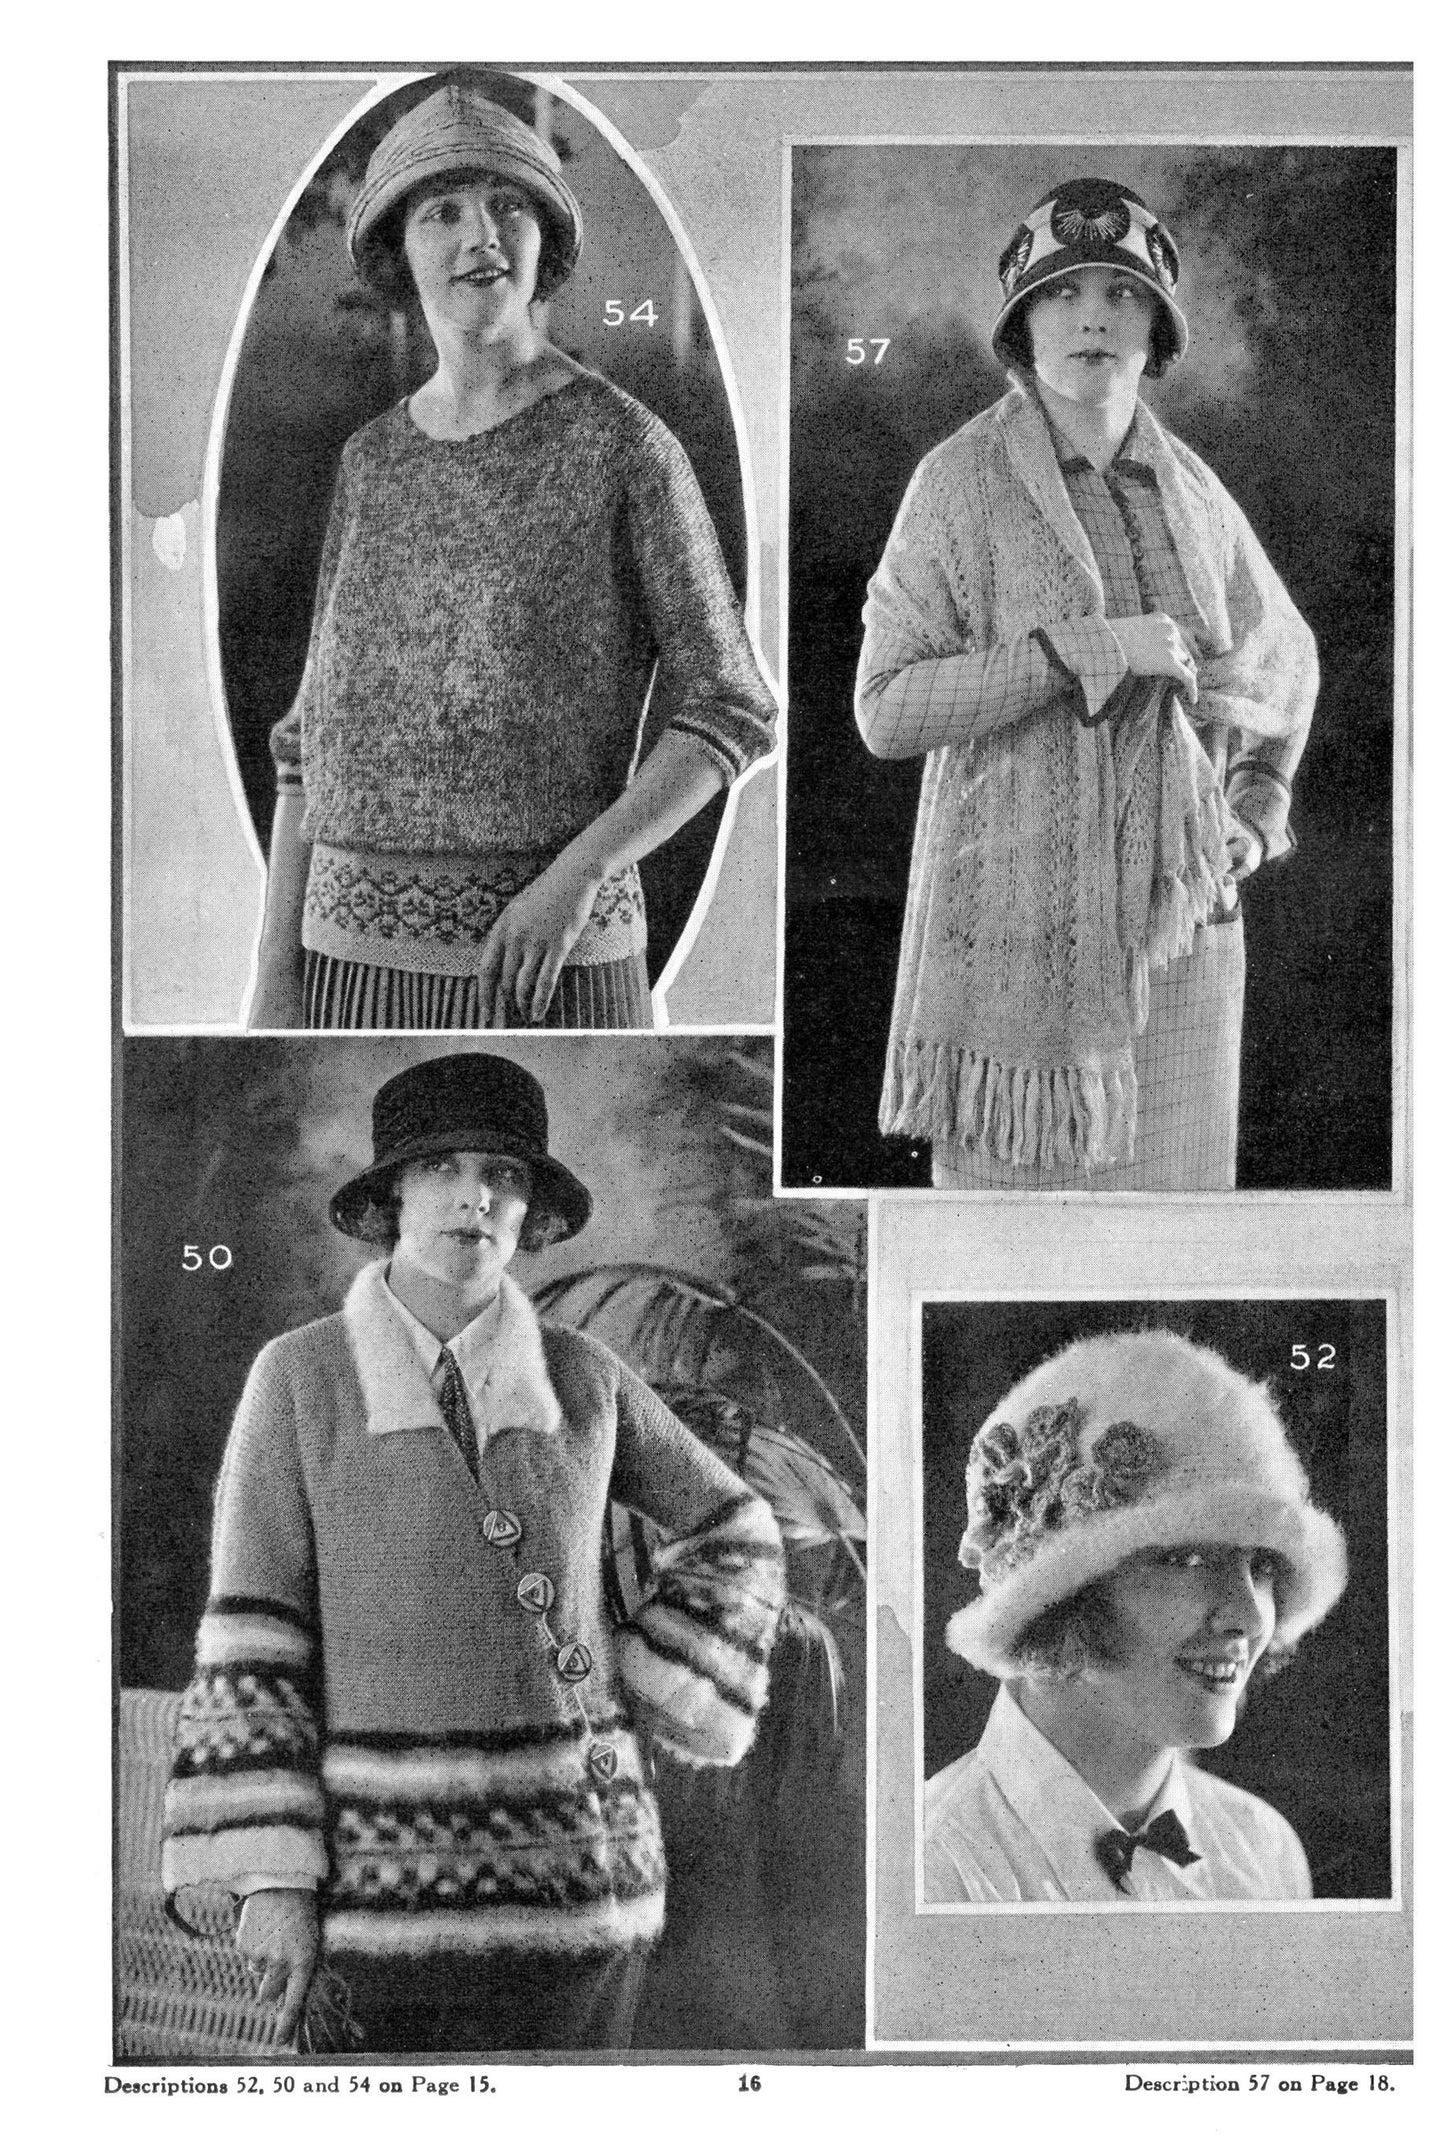 E-BOOK 1924 1920s Novelty Sweater Knitting Book- Monarch Yarns- Knitting Crochet- Ladies Sweaters & Wraps- 20s